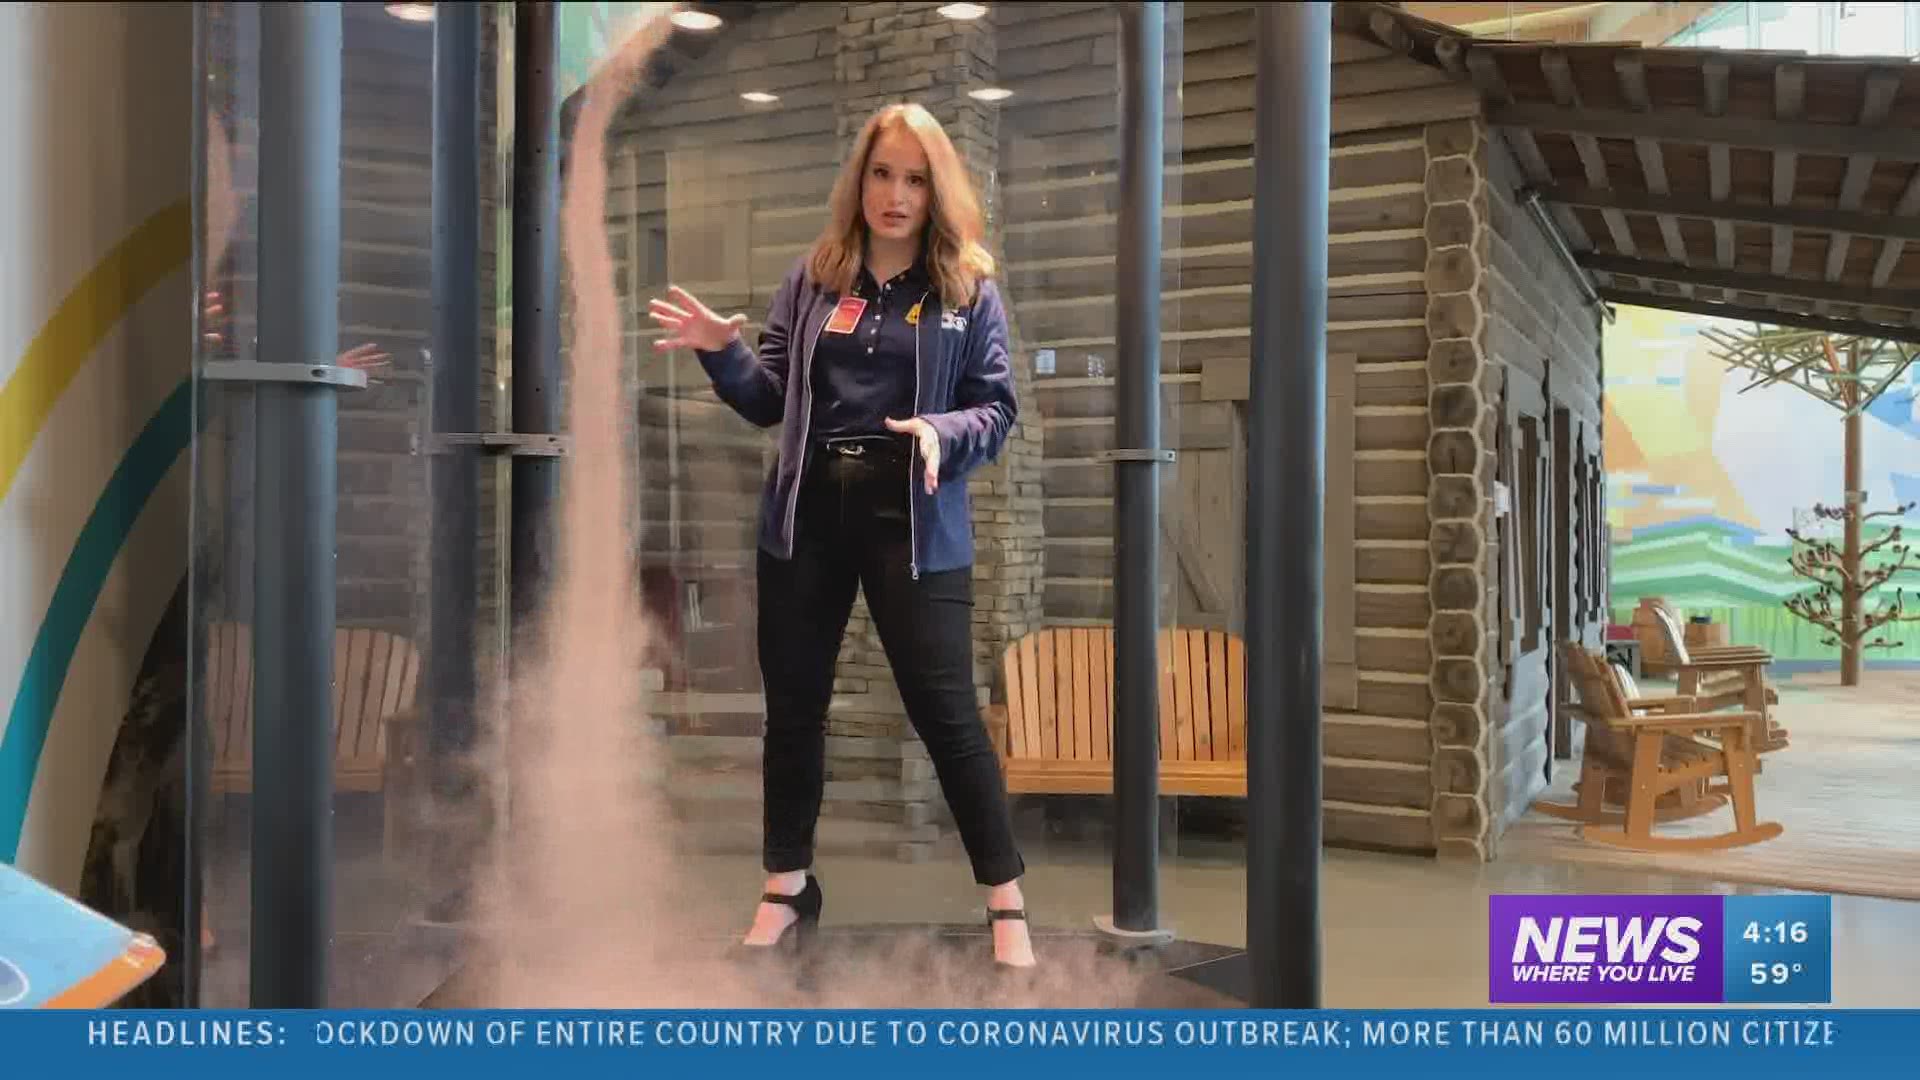 A local kids museum has a fun and interactive way to learn about nature and weather. Meteorologist Sabrina Bates took a field trip to teach us about tornadoes.